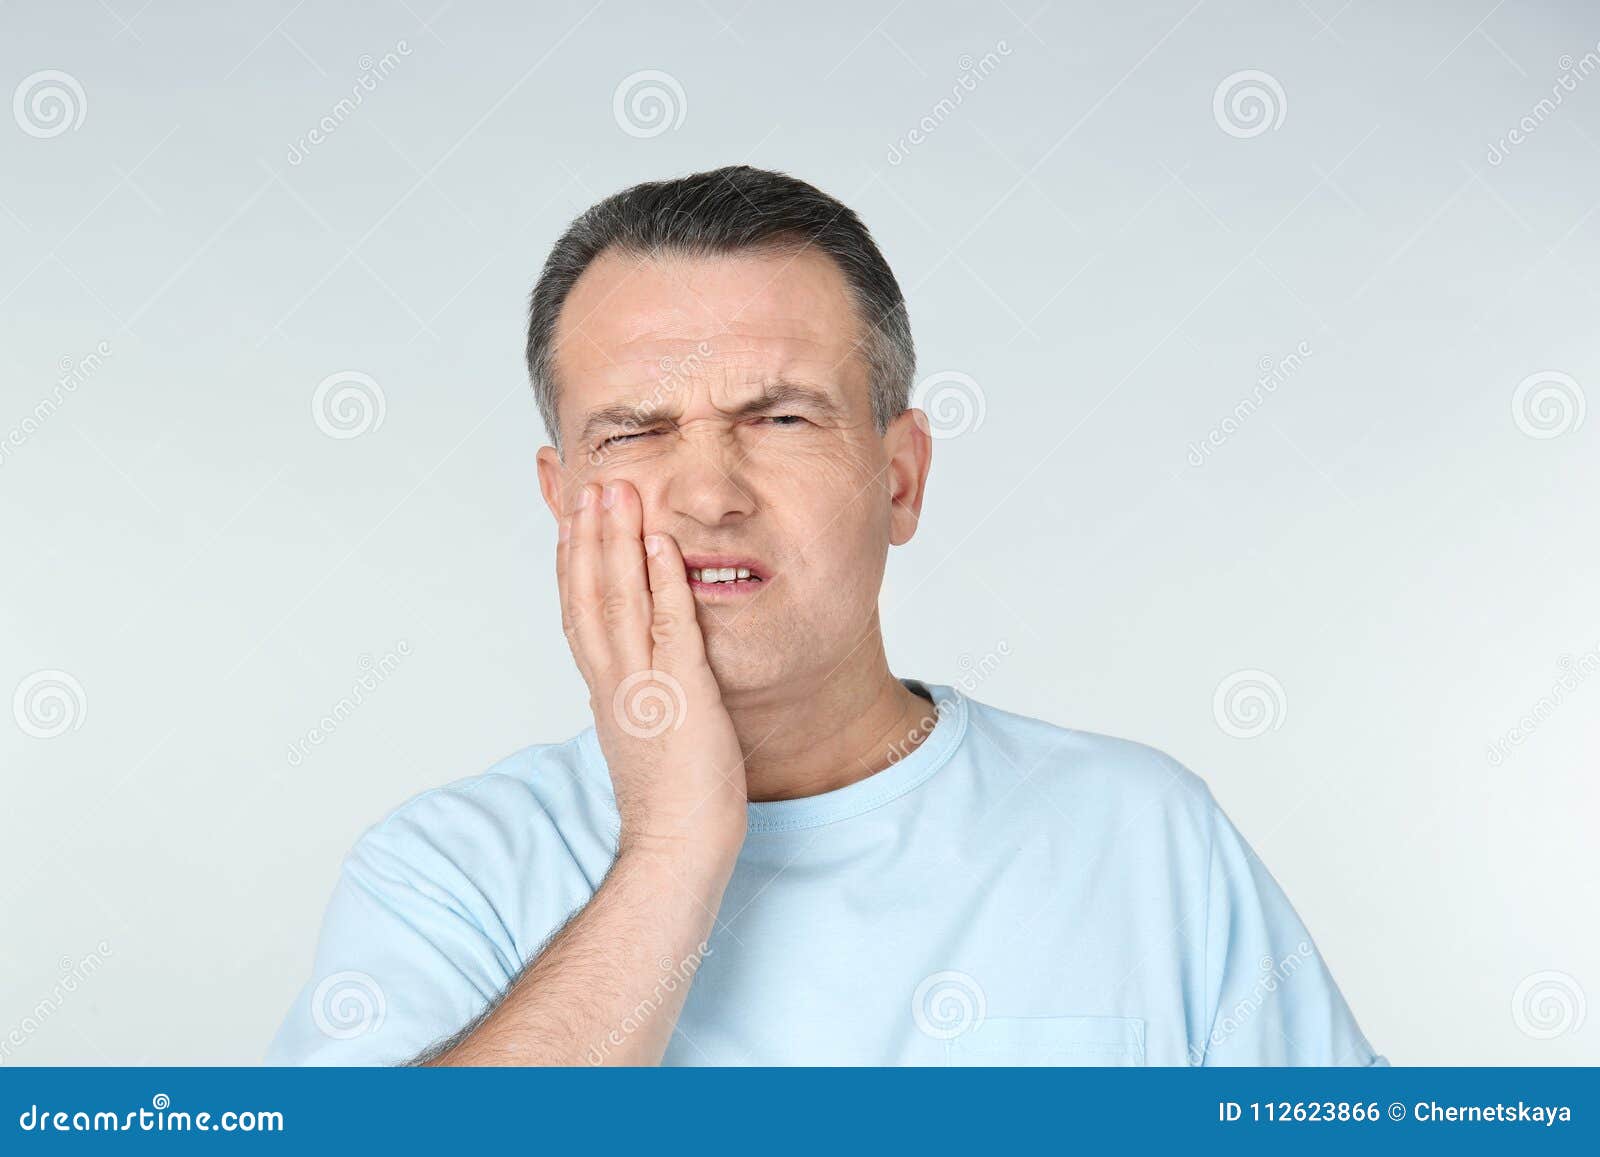 Man Suffering from Toothache Stock Photo - Image of pain, dental: 112623866